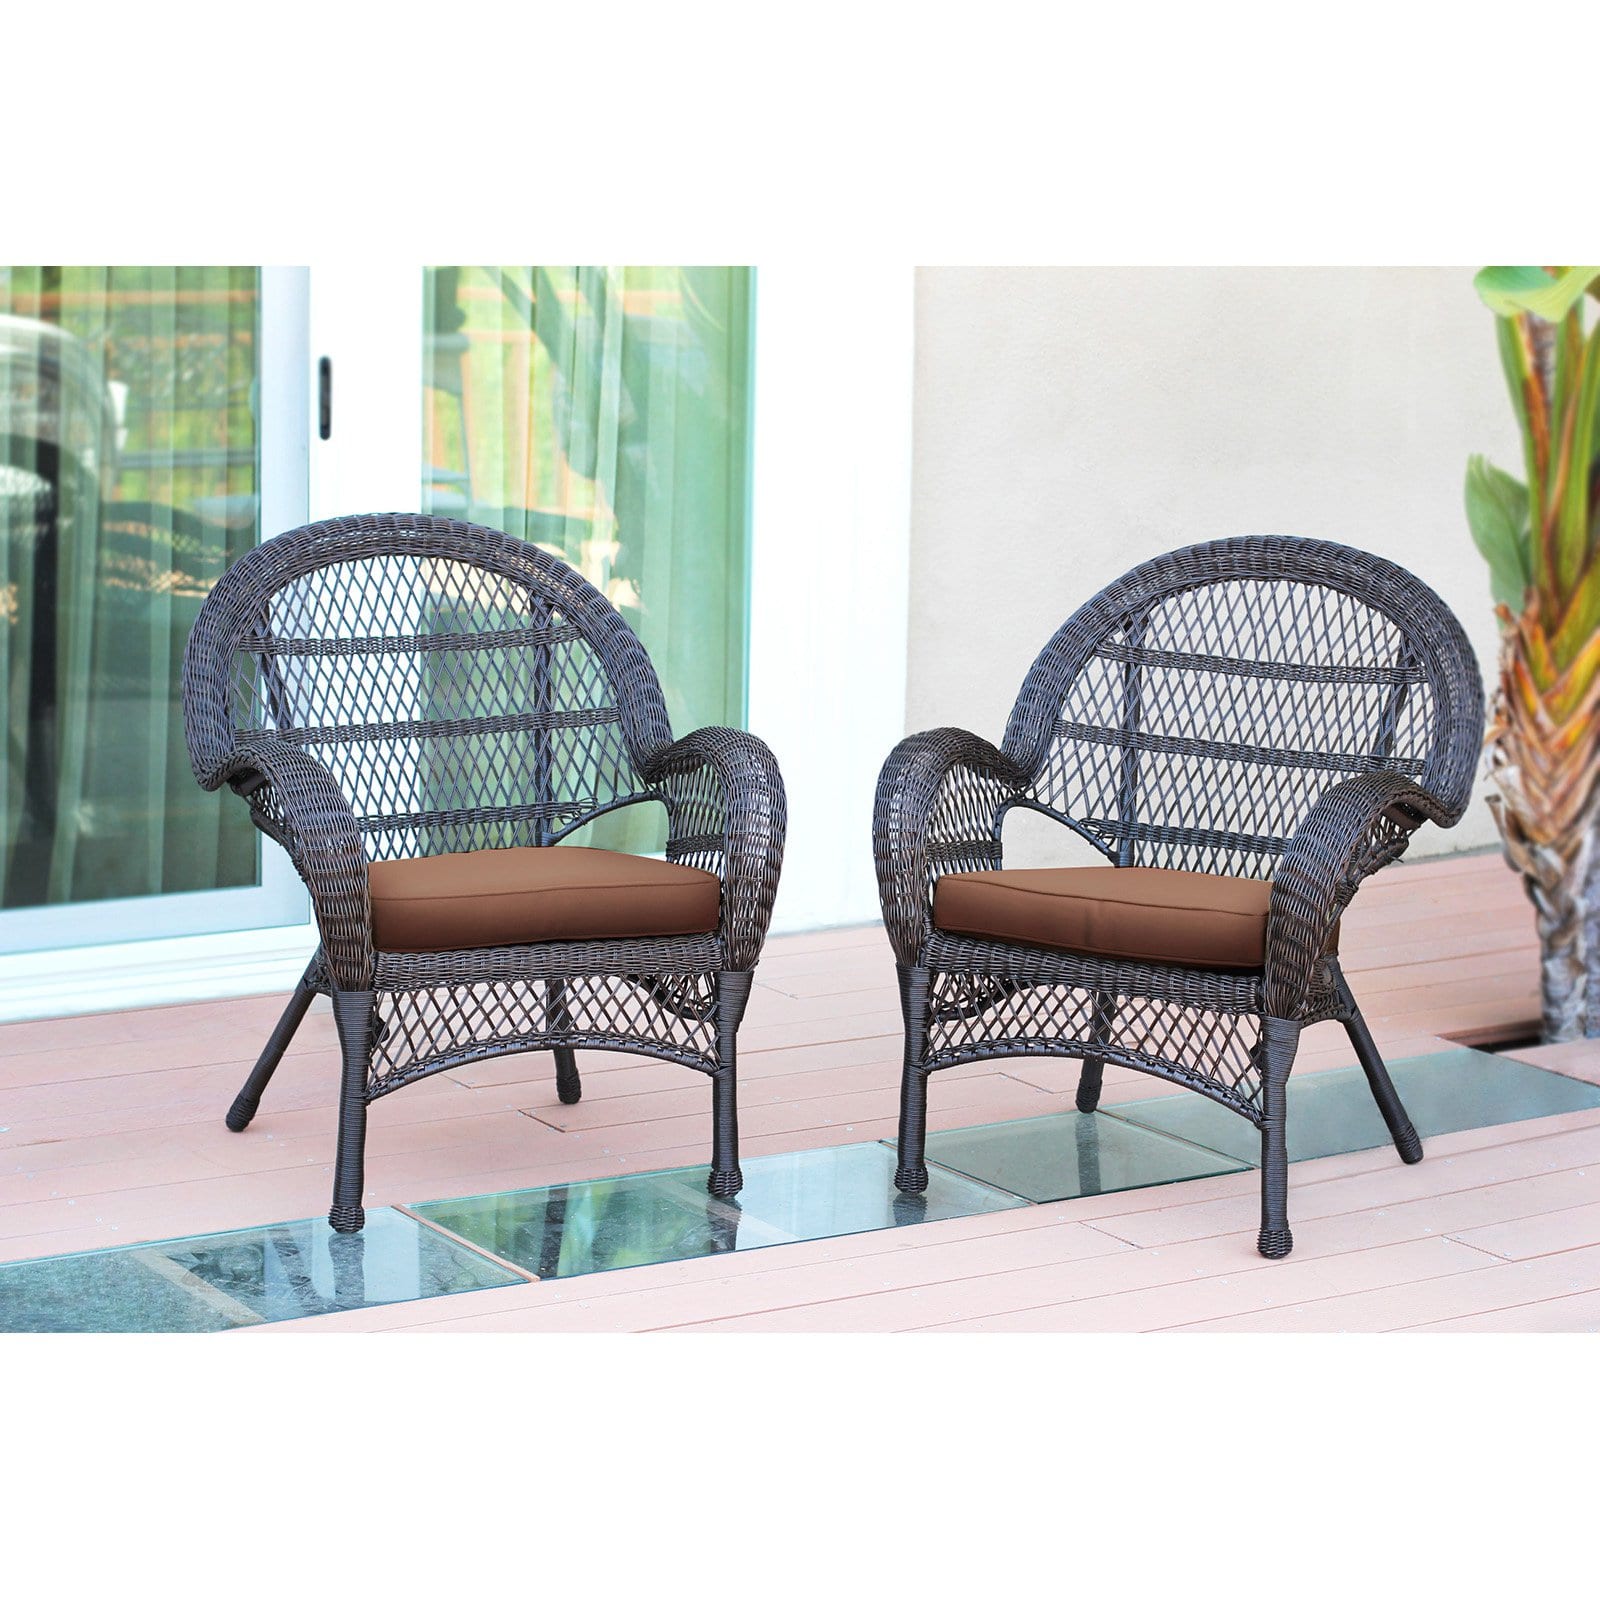 Jeco Wicker Chair in Espresso with Brown Cushion (Set of 4) - image 2 of 11